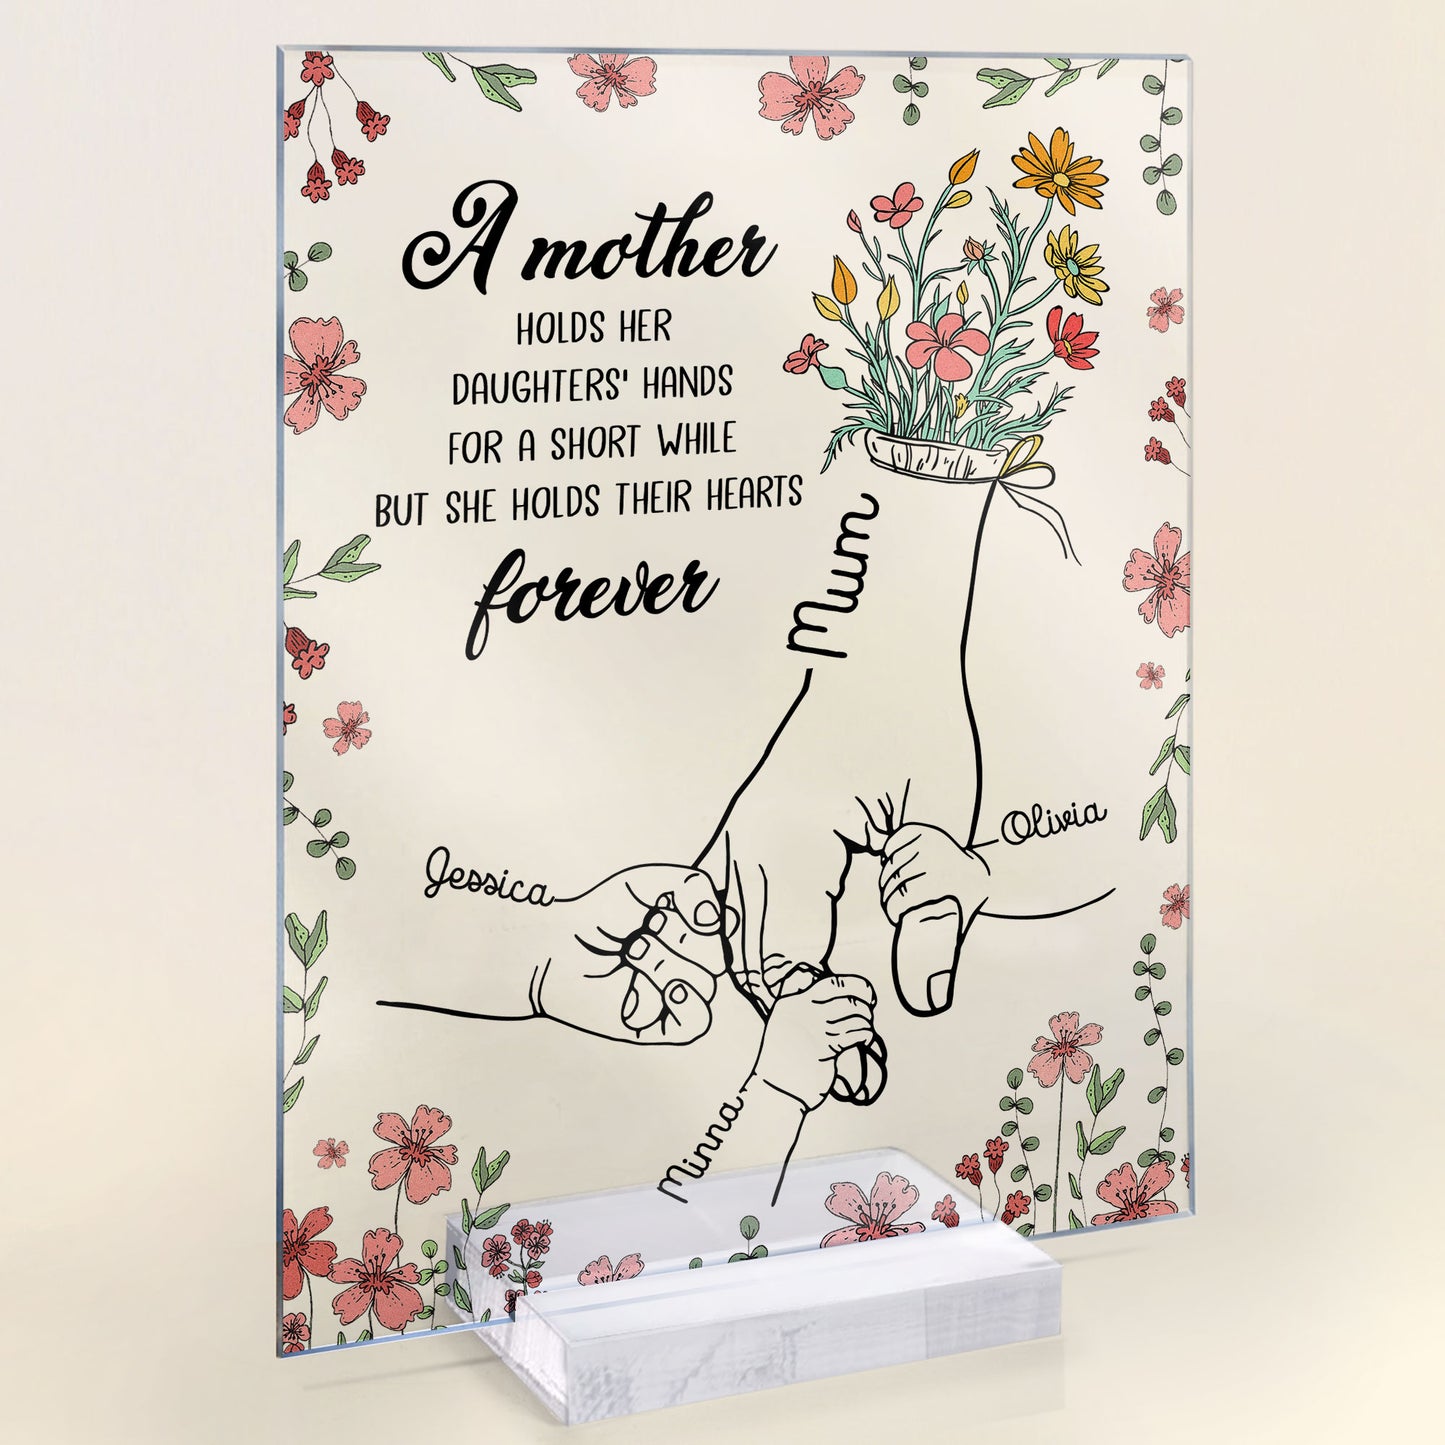 A Mother Holds Her Daughters' Hands - Personalized Acrylic Plaque